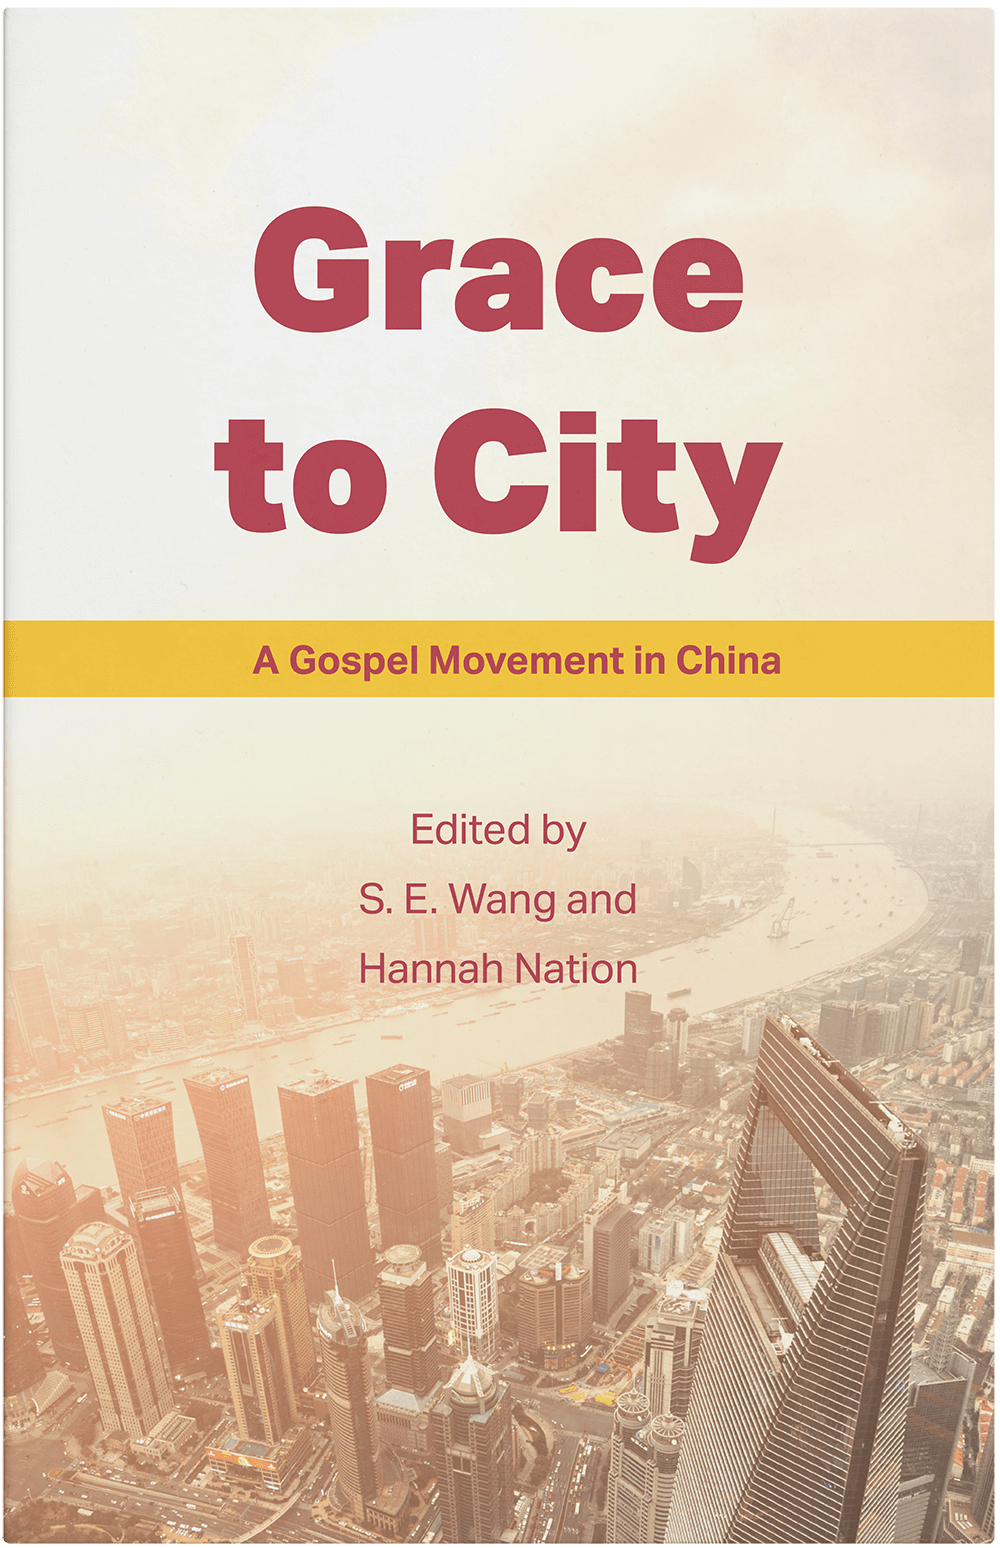 Grace to City, A Gospel Movement in China, Edited by S.E. Wang and Hannah Nation. An eBook by China Partnership.